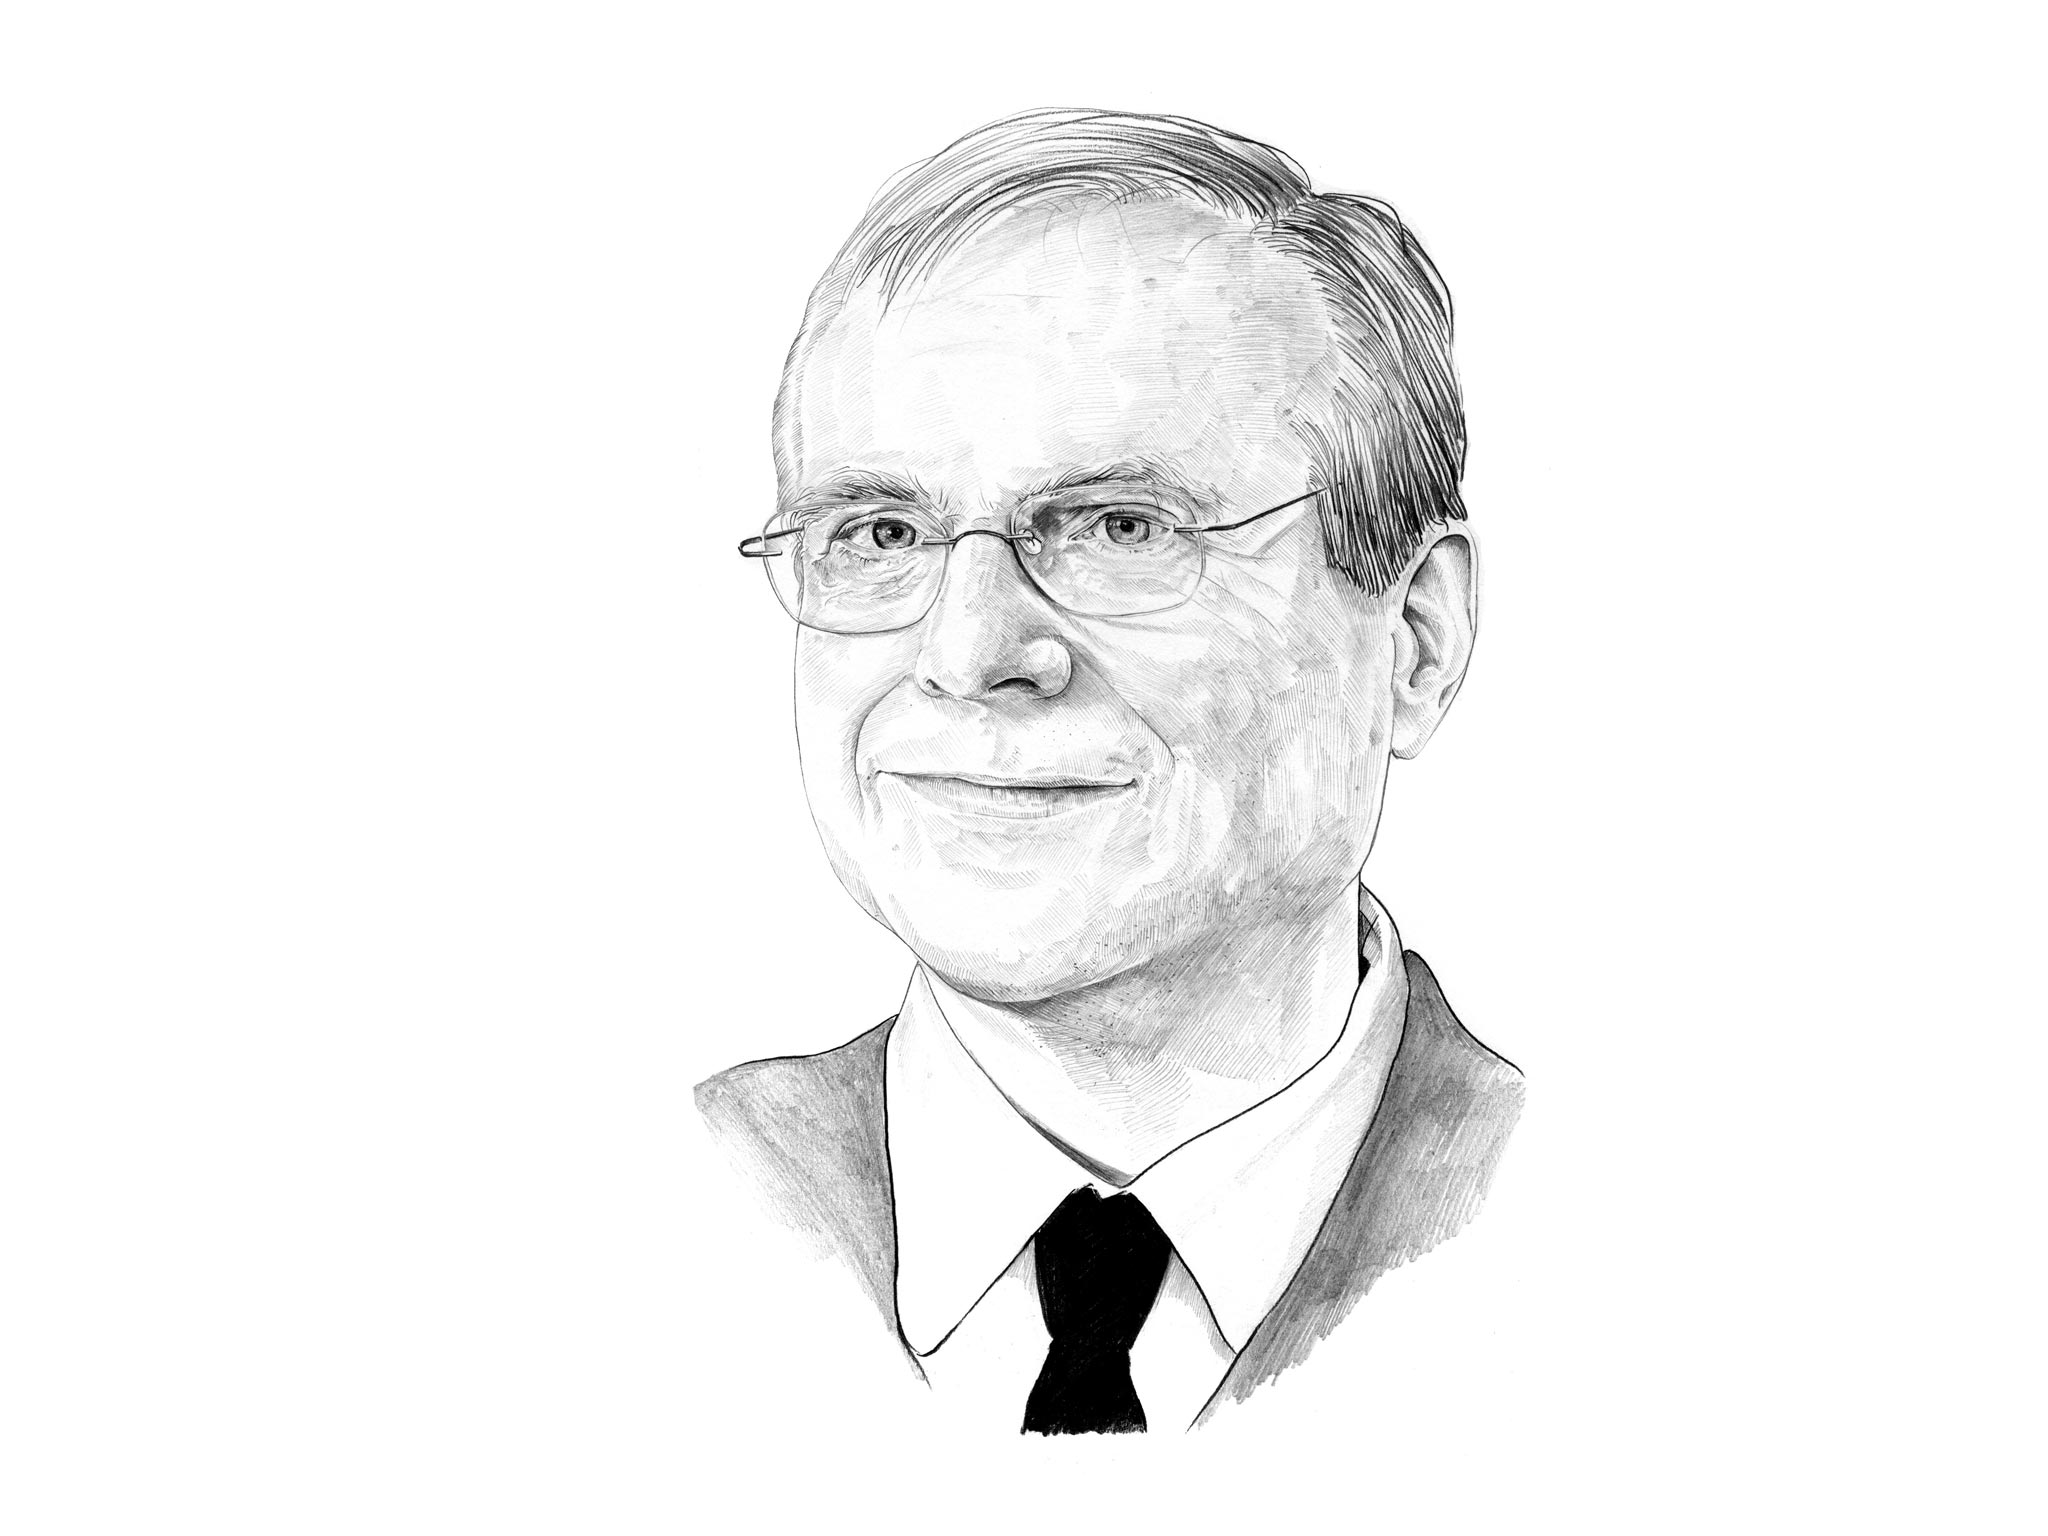 Microsoft co-founder Paul G. Allen, who is now trying to map the brain